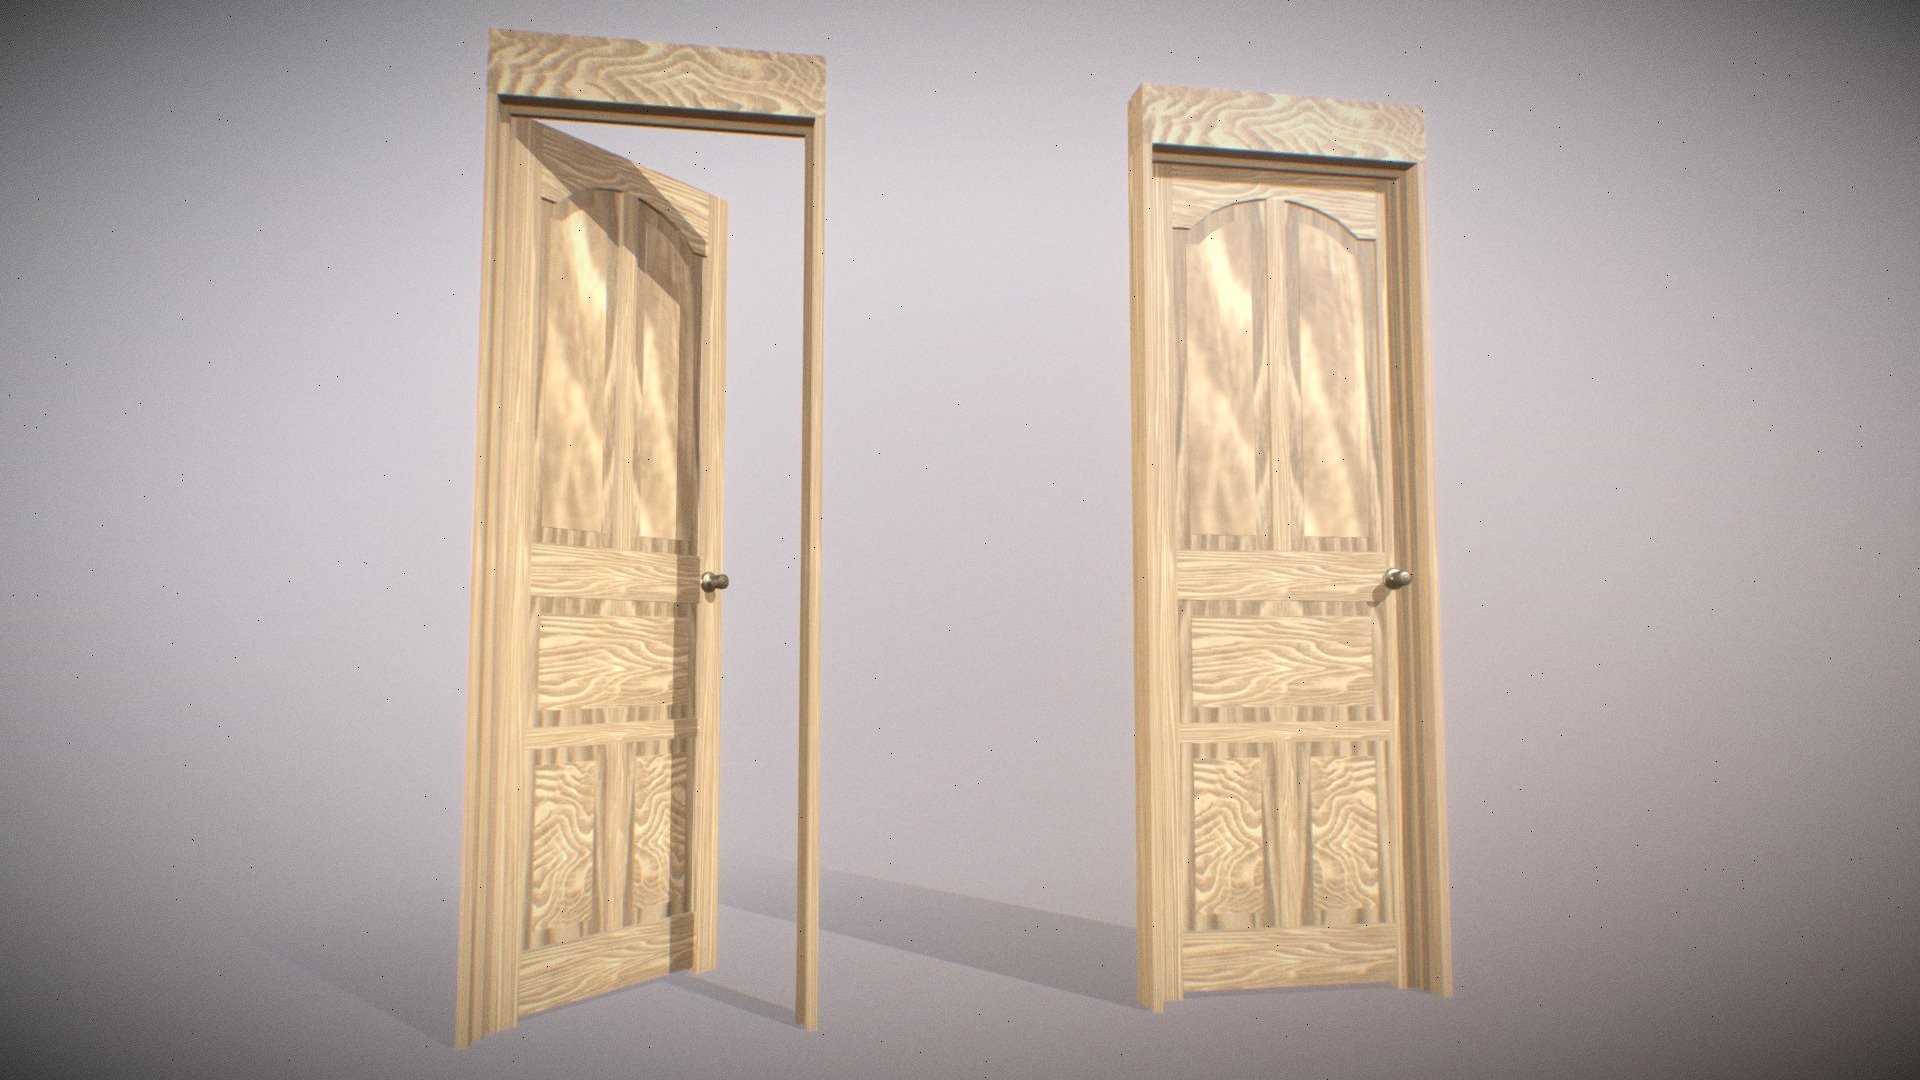 Decorated wooden Door with frame and door knob, door is modeled as separate object from the frame so it can be animated as opened

Clean topology based on quads ready for subdivision, rigging and animation!

💮 If you liked my work remember to Follow me and Share! 🧸 💬 Commissions Open: ko-fi.com/Tsubasa_Art ☕🌸 !! - Wooden Door with frame - Buy Royalty Free 3D model by Tsubasa ツバサ (@Tsubasa_Art) 3d model